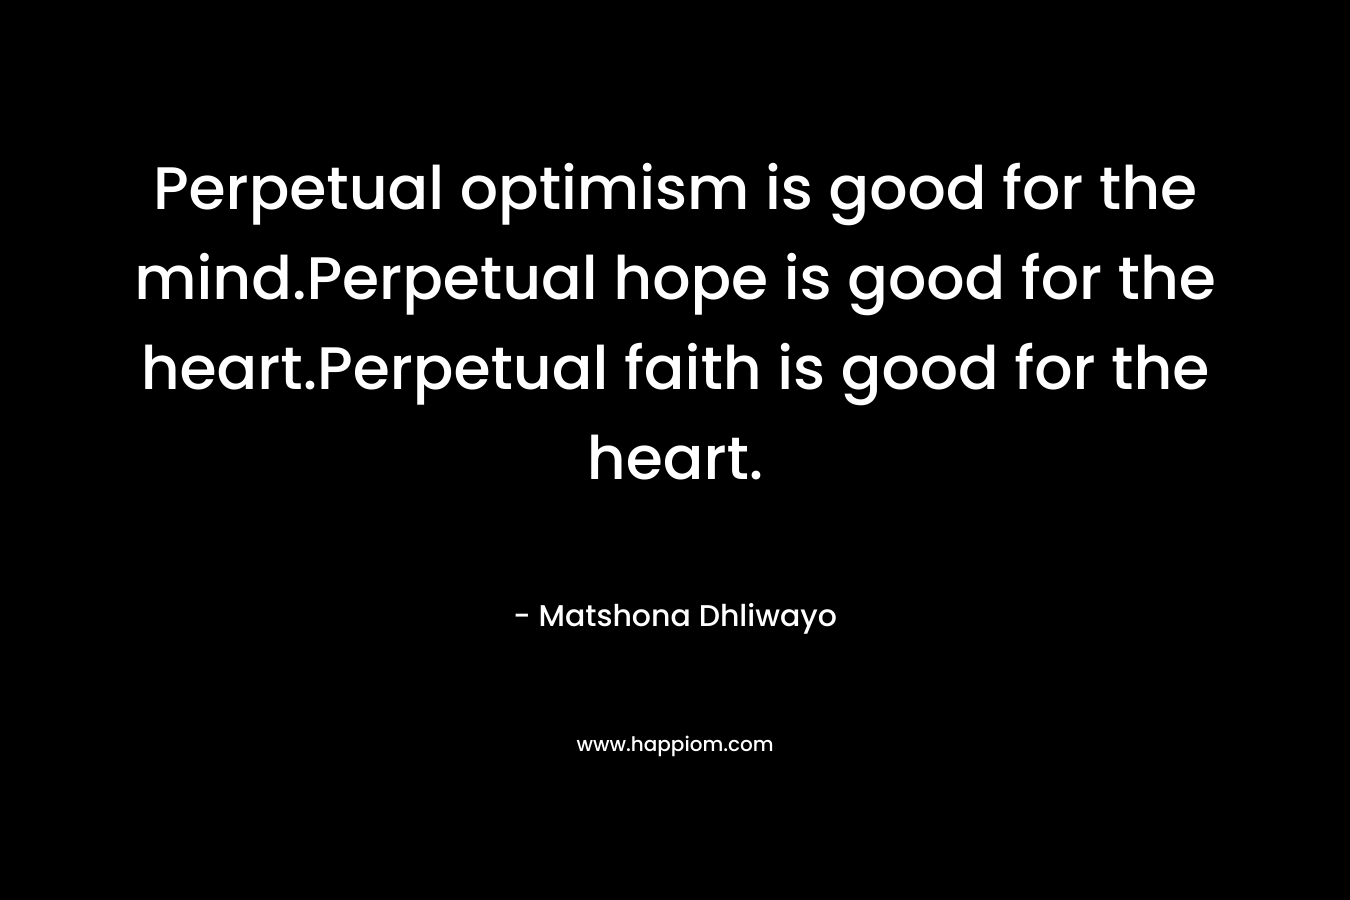 Perpetual optimism is good for the mind.Perpetual hope is good for the heart.Perpetual faith is good for the heart.